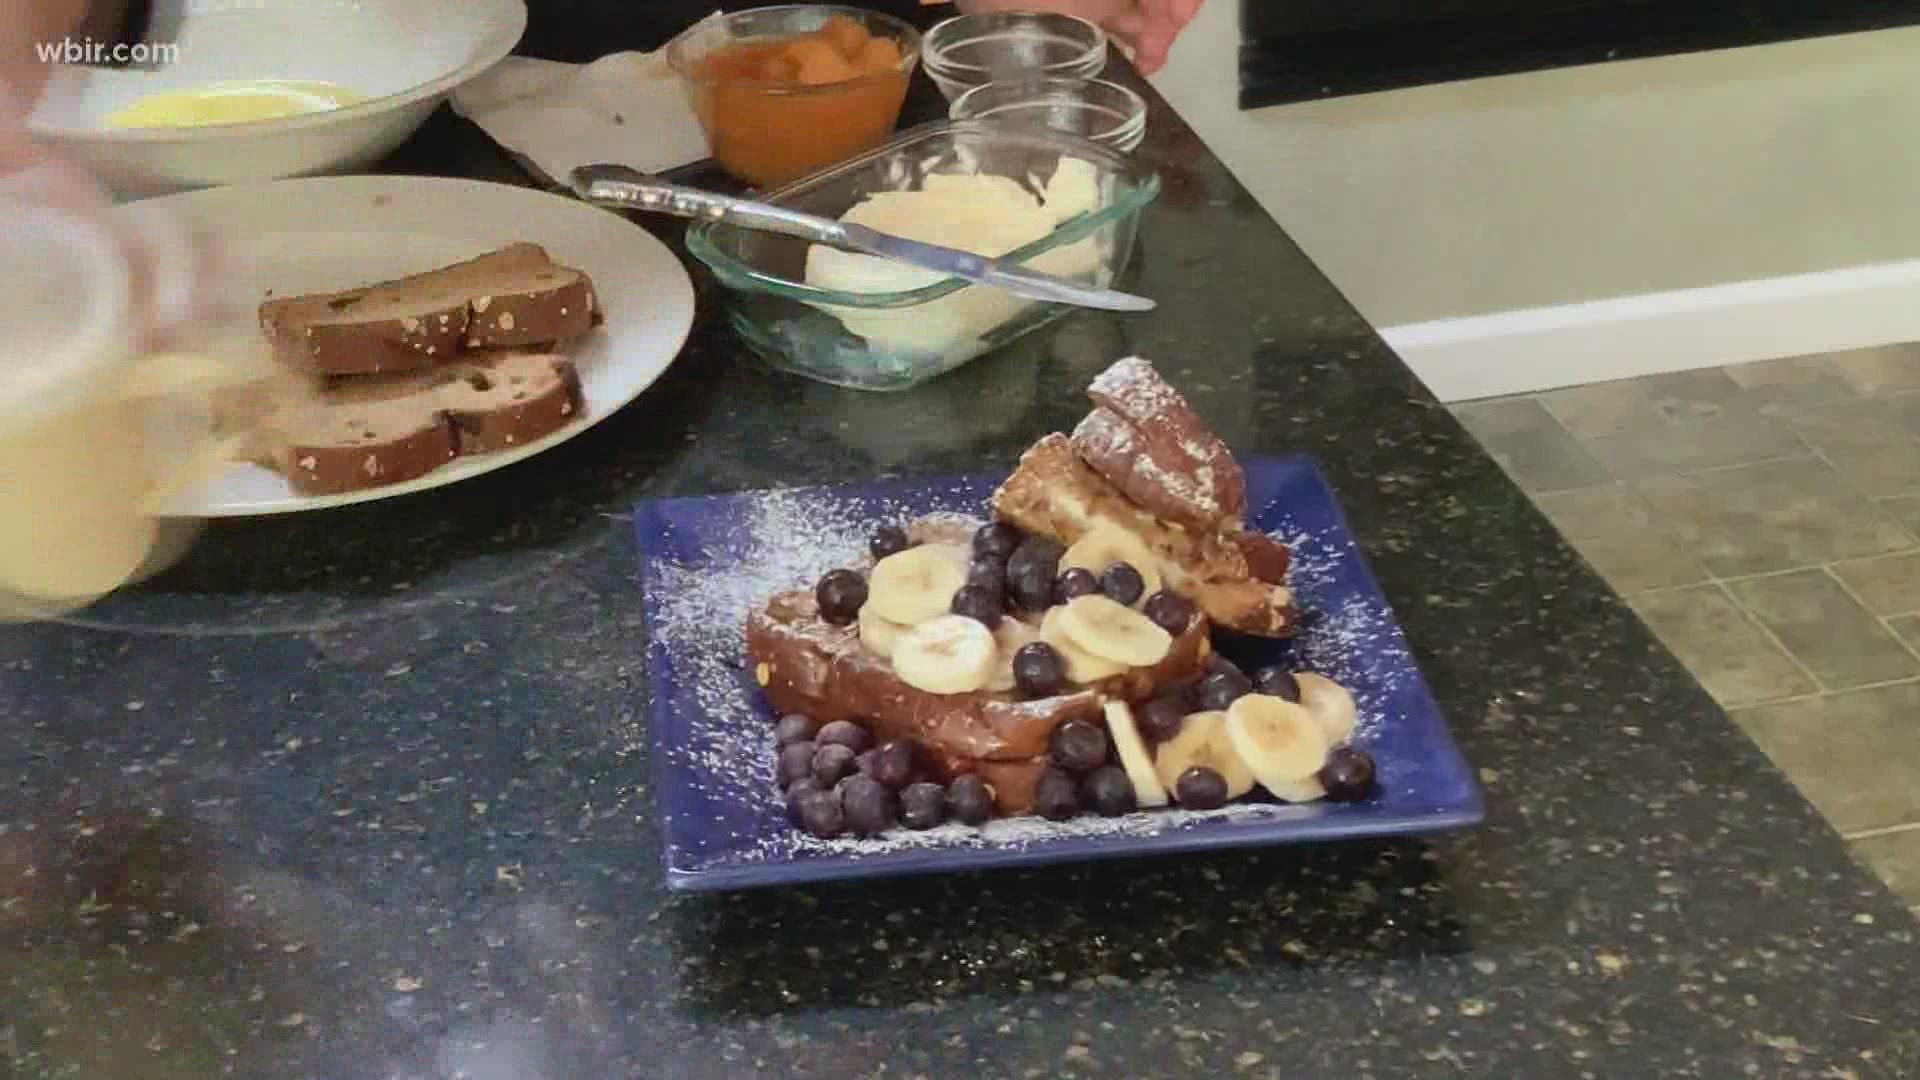 Terri Geiser from the UT Culinary Institute makes a Banana Cinnamon French Toast.